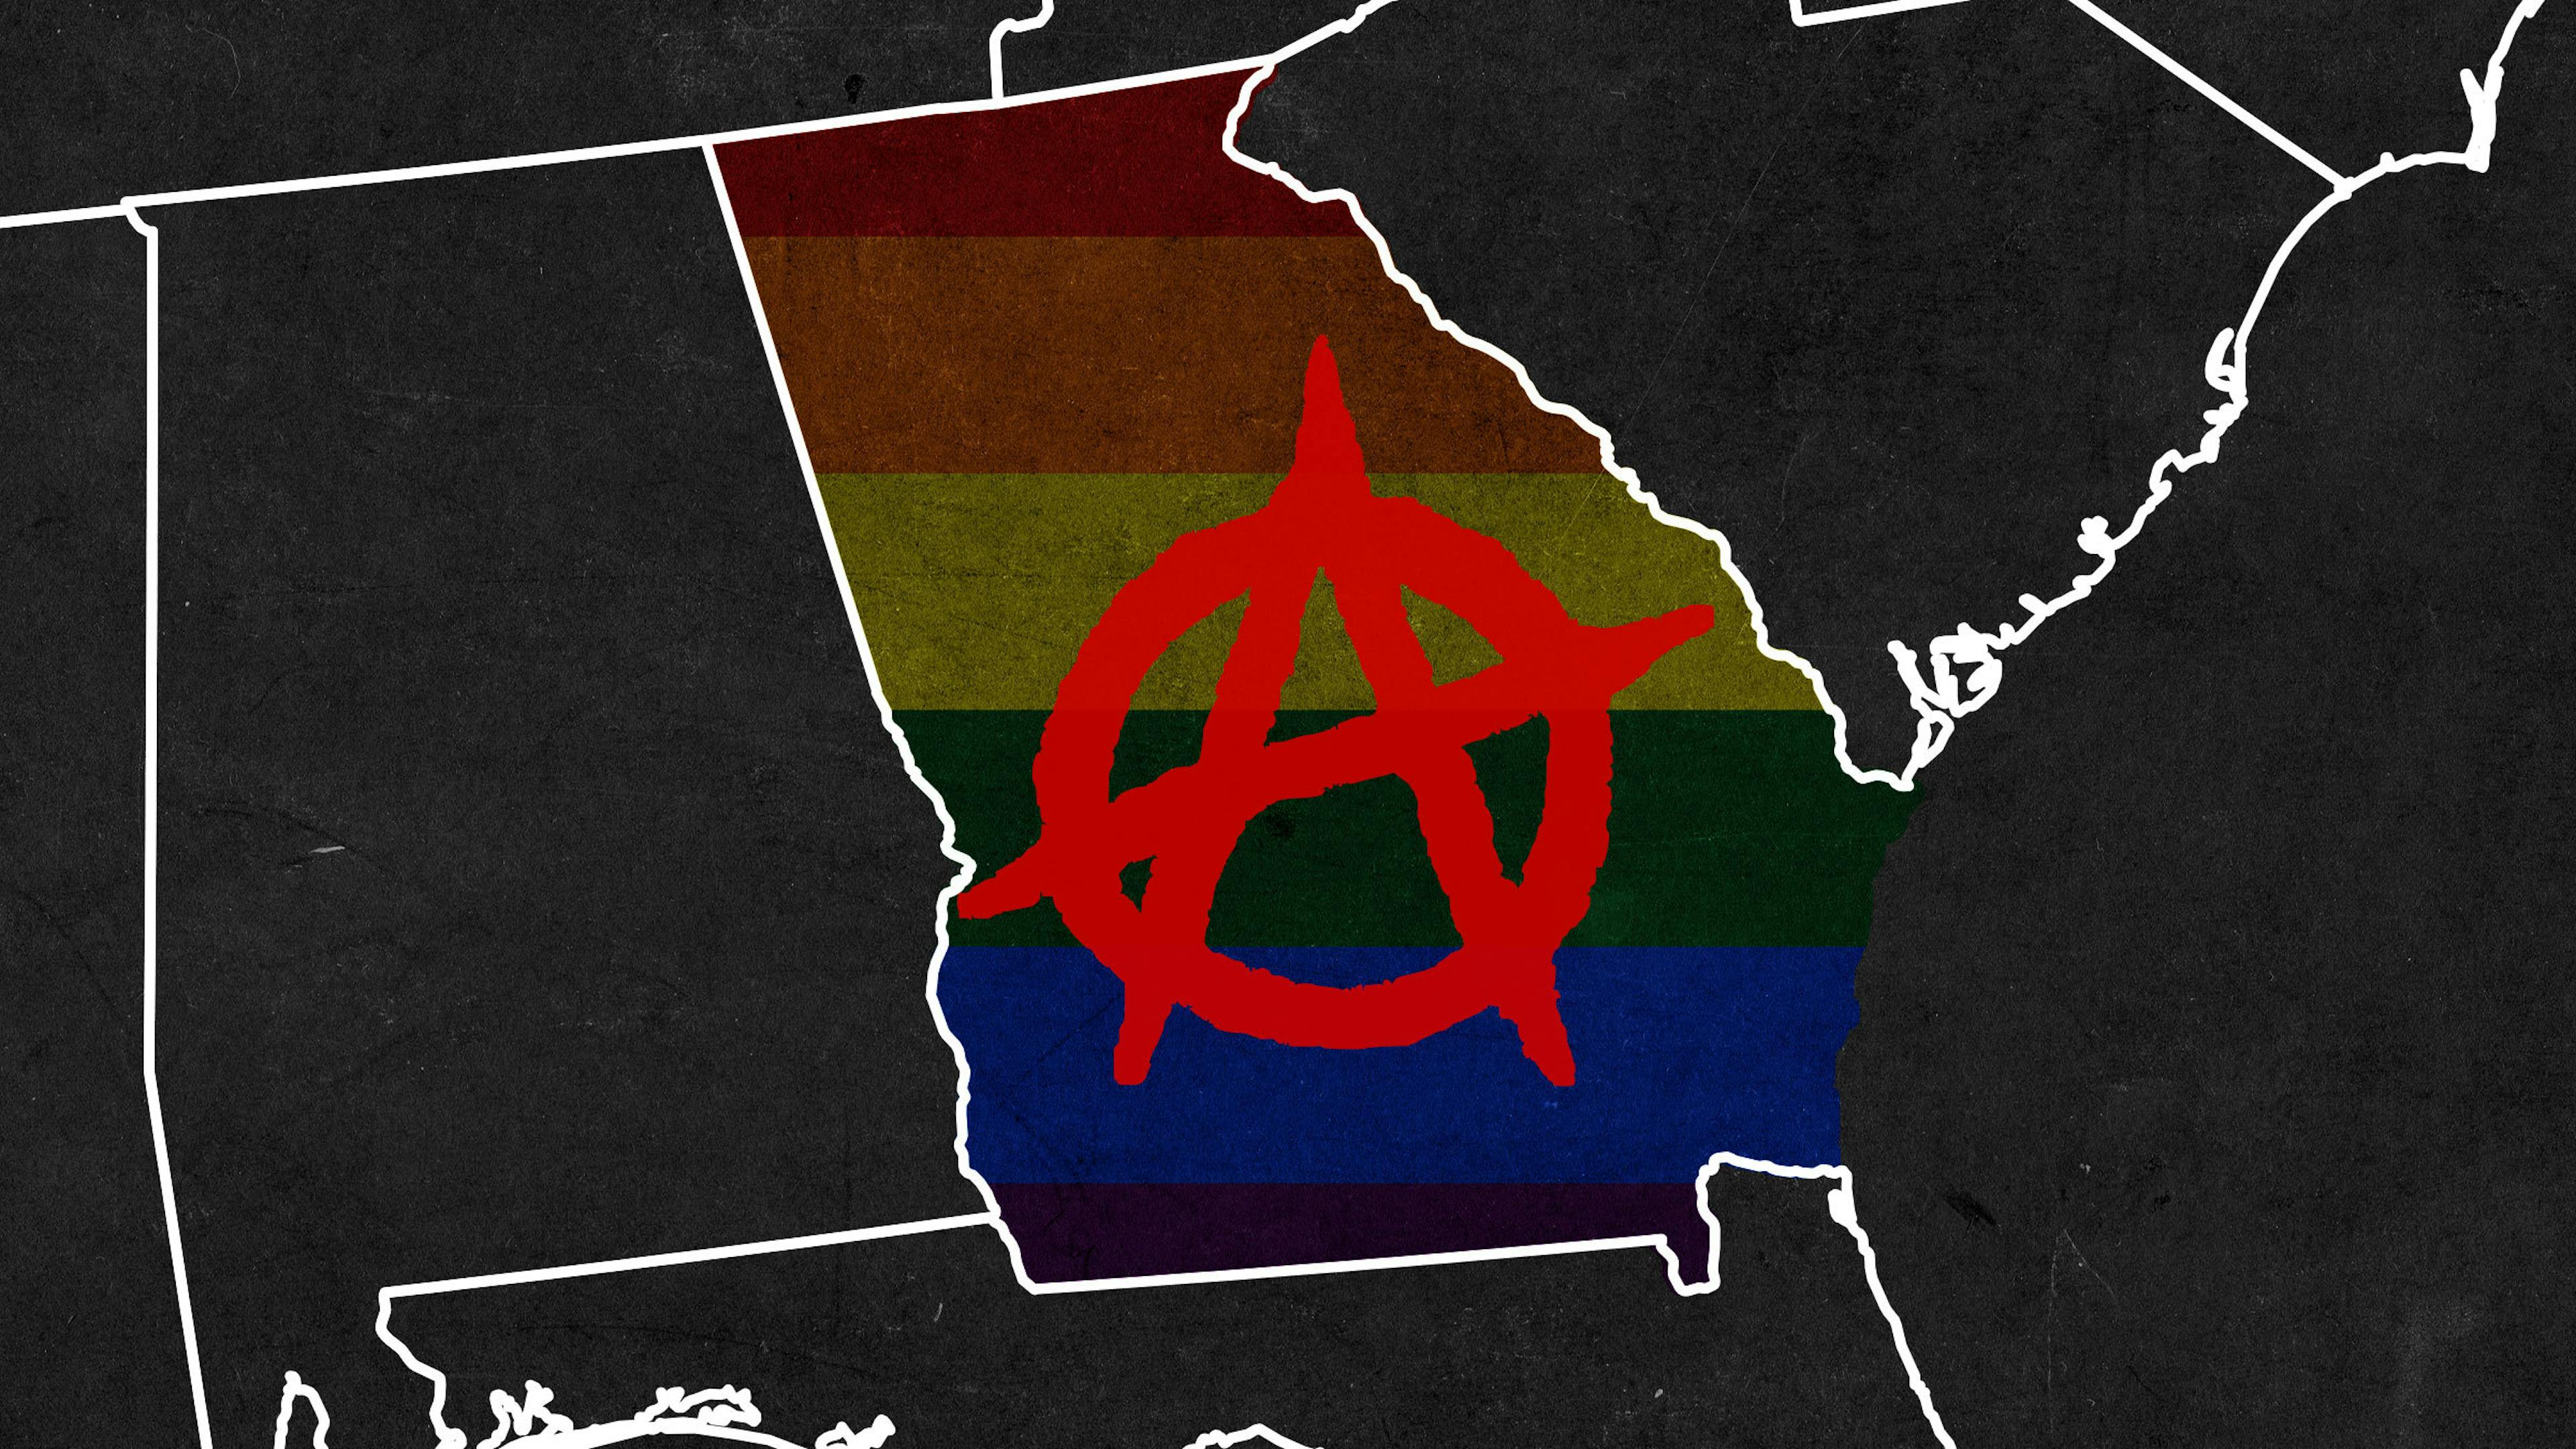 The Queer Punk Scene Is Defiantly Thriving In The American South